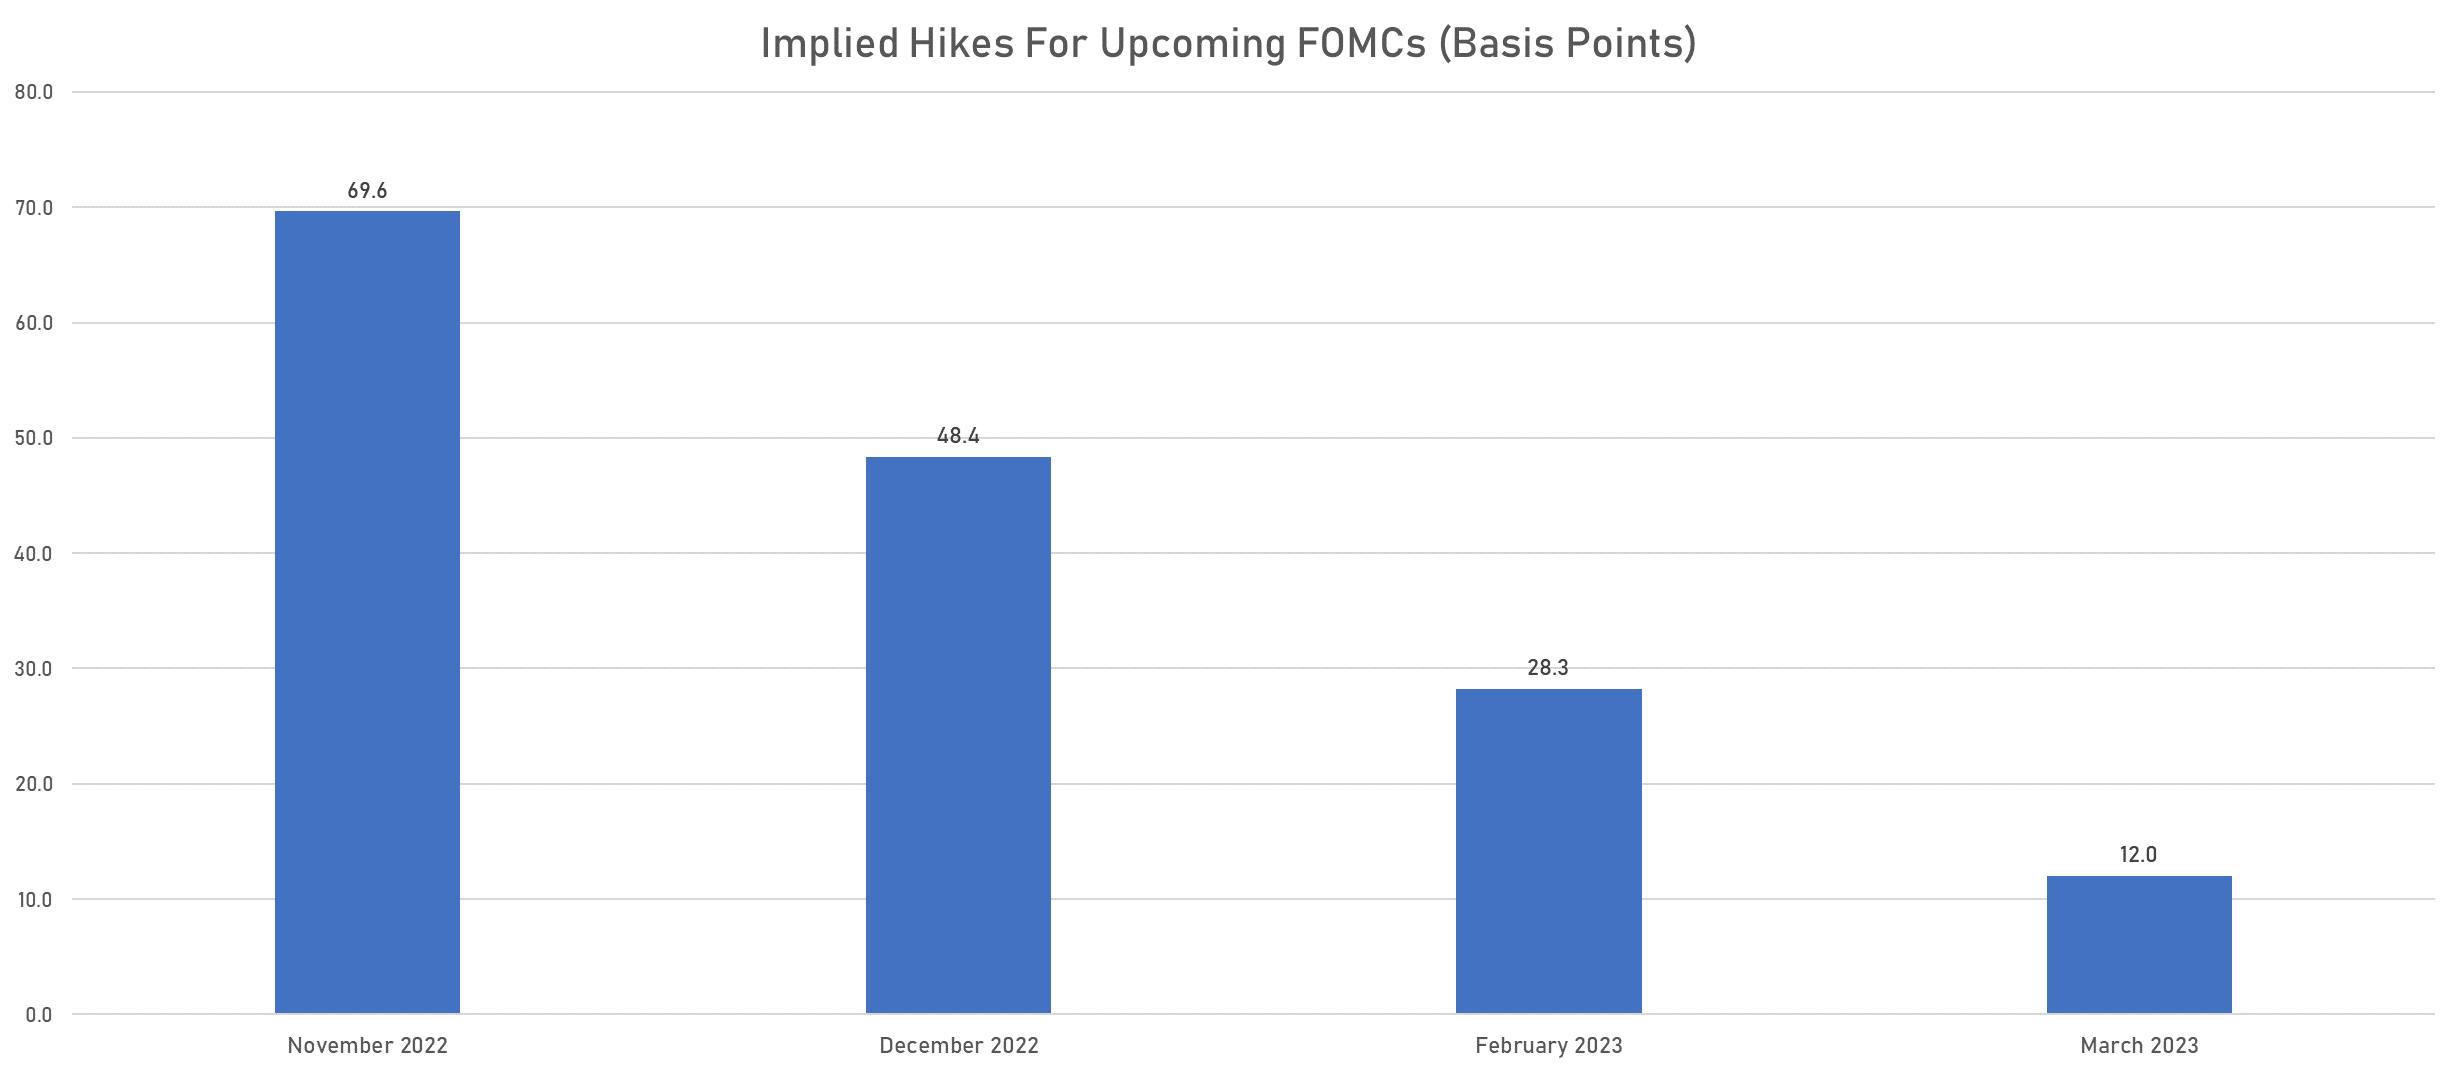 Pricing of upcoming FOMC rate hikes | Sources: phipost.com, Refinitiv data